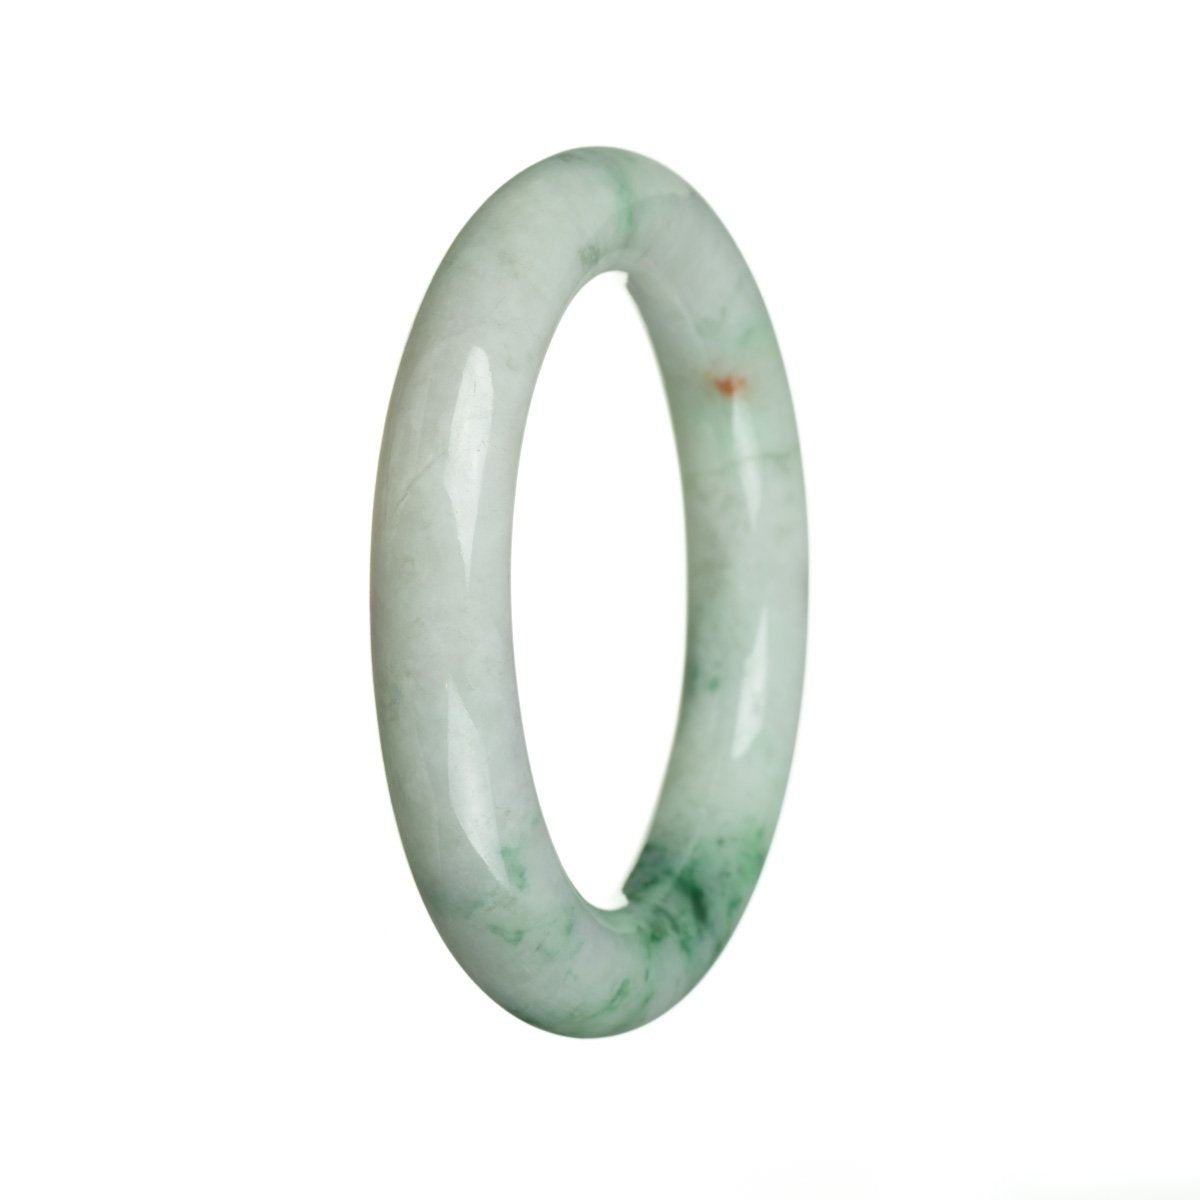 A close-up photo of a round jadeite jade bracelet with a white base color and a green flower pattern. The bracelet measures 56mm in diameter and is of high quality (Grade A). It is being sold by MAYS GEMS.